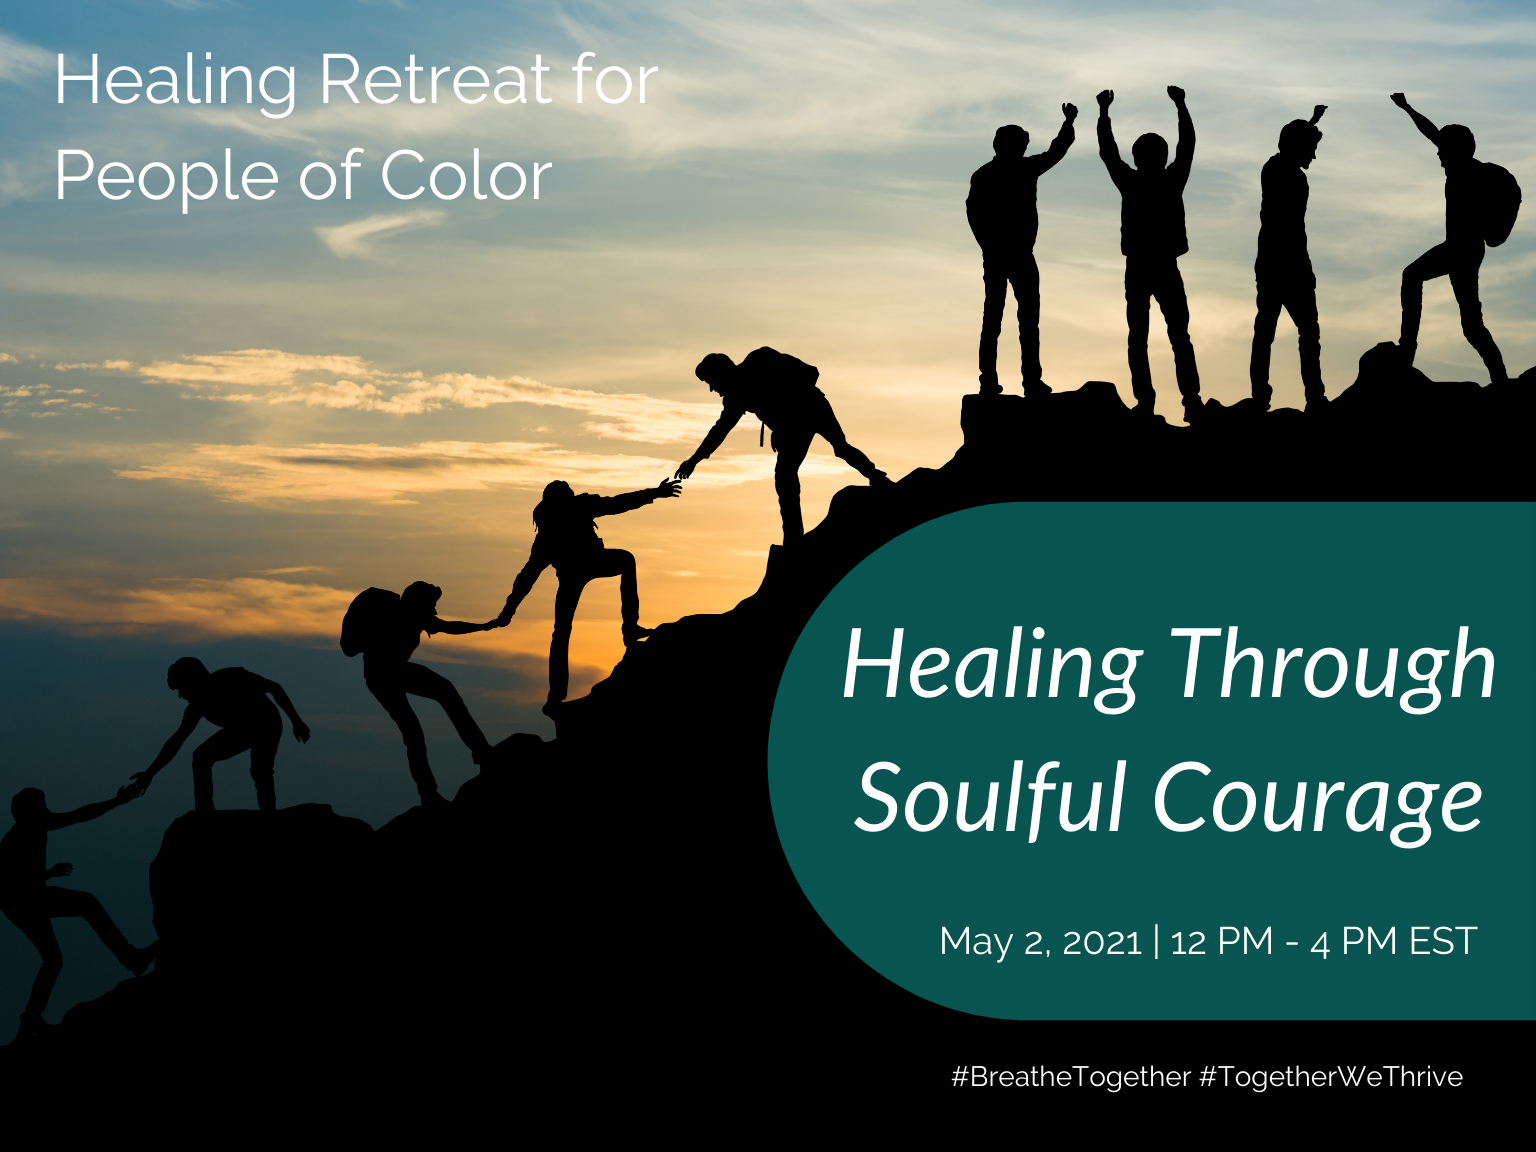 Healing retreat for people of color.